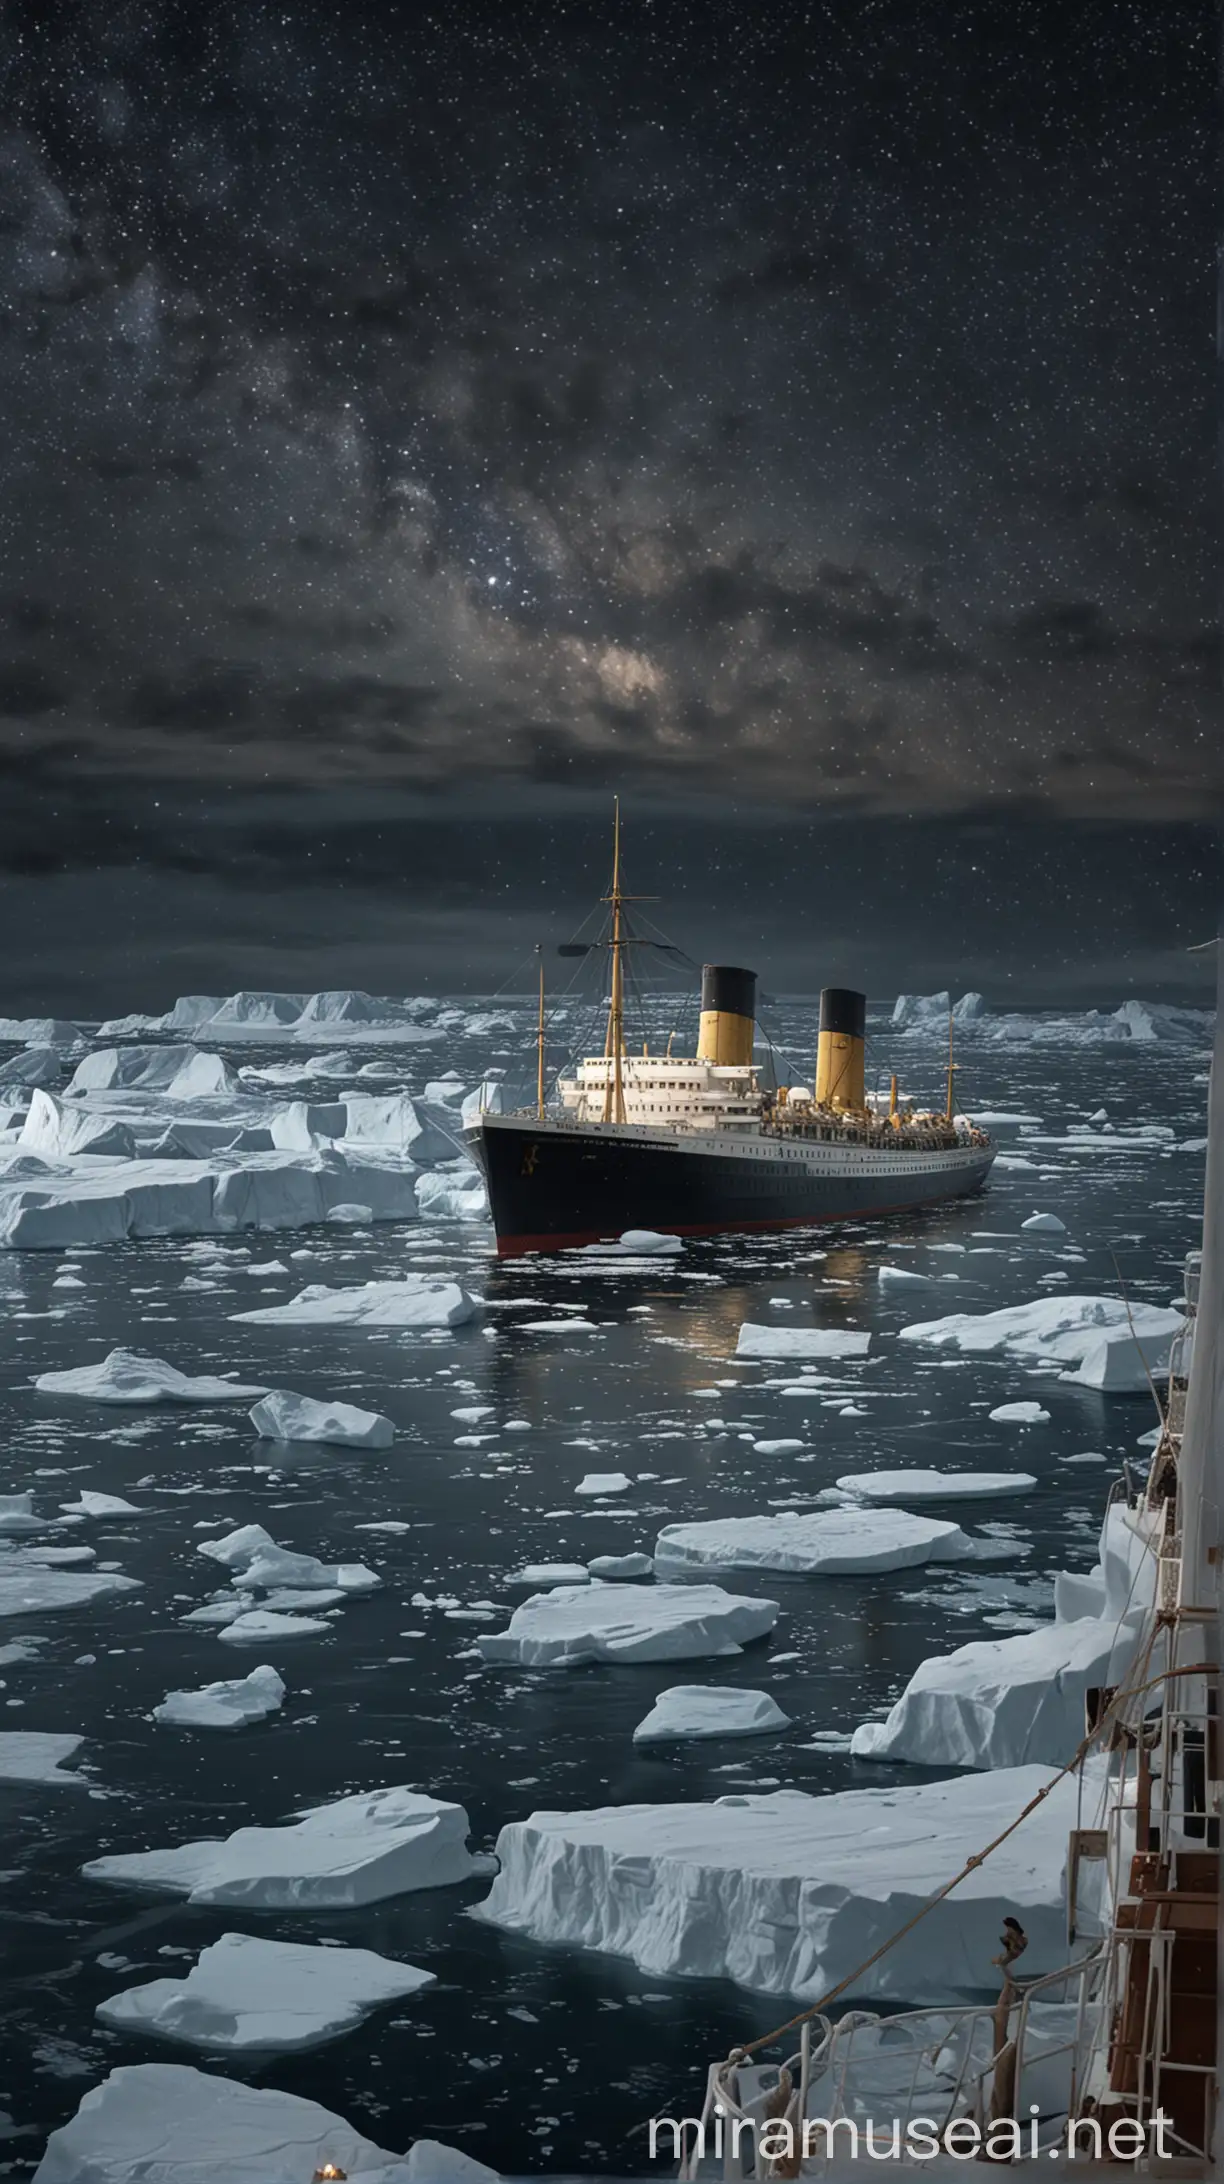 A starry night in the North Atlantic with the SS Californian halting its journey amidst a sea scattered with large icebergs. Captain Stanley Lord stands on the deck, looking out over the icy waters with concern, while the radio operator sends out warning messages to nearby ships. hyper realistic